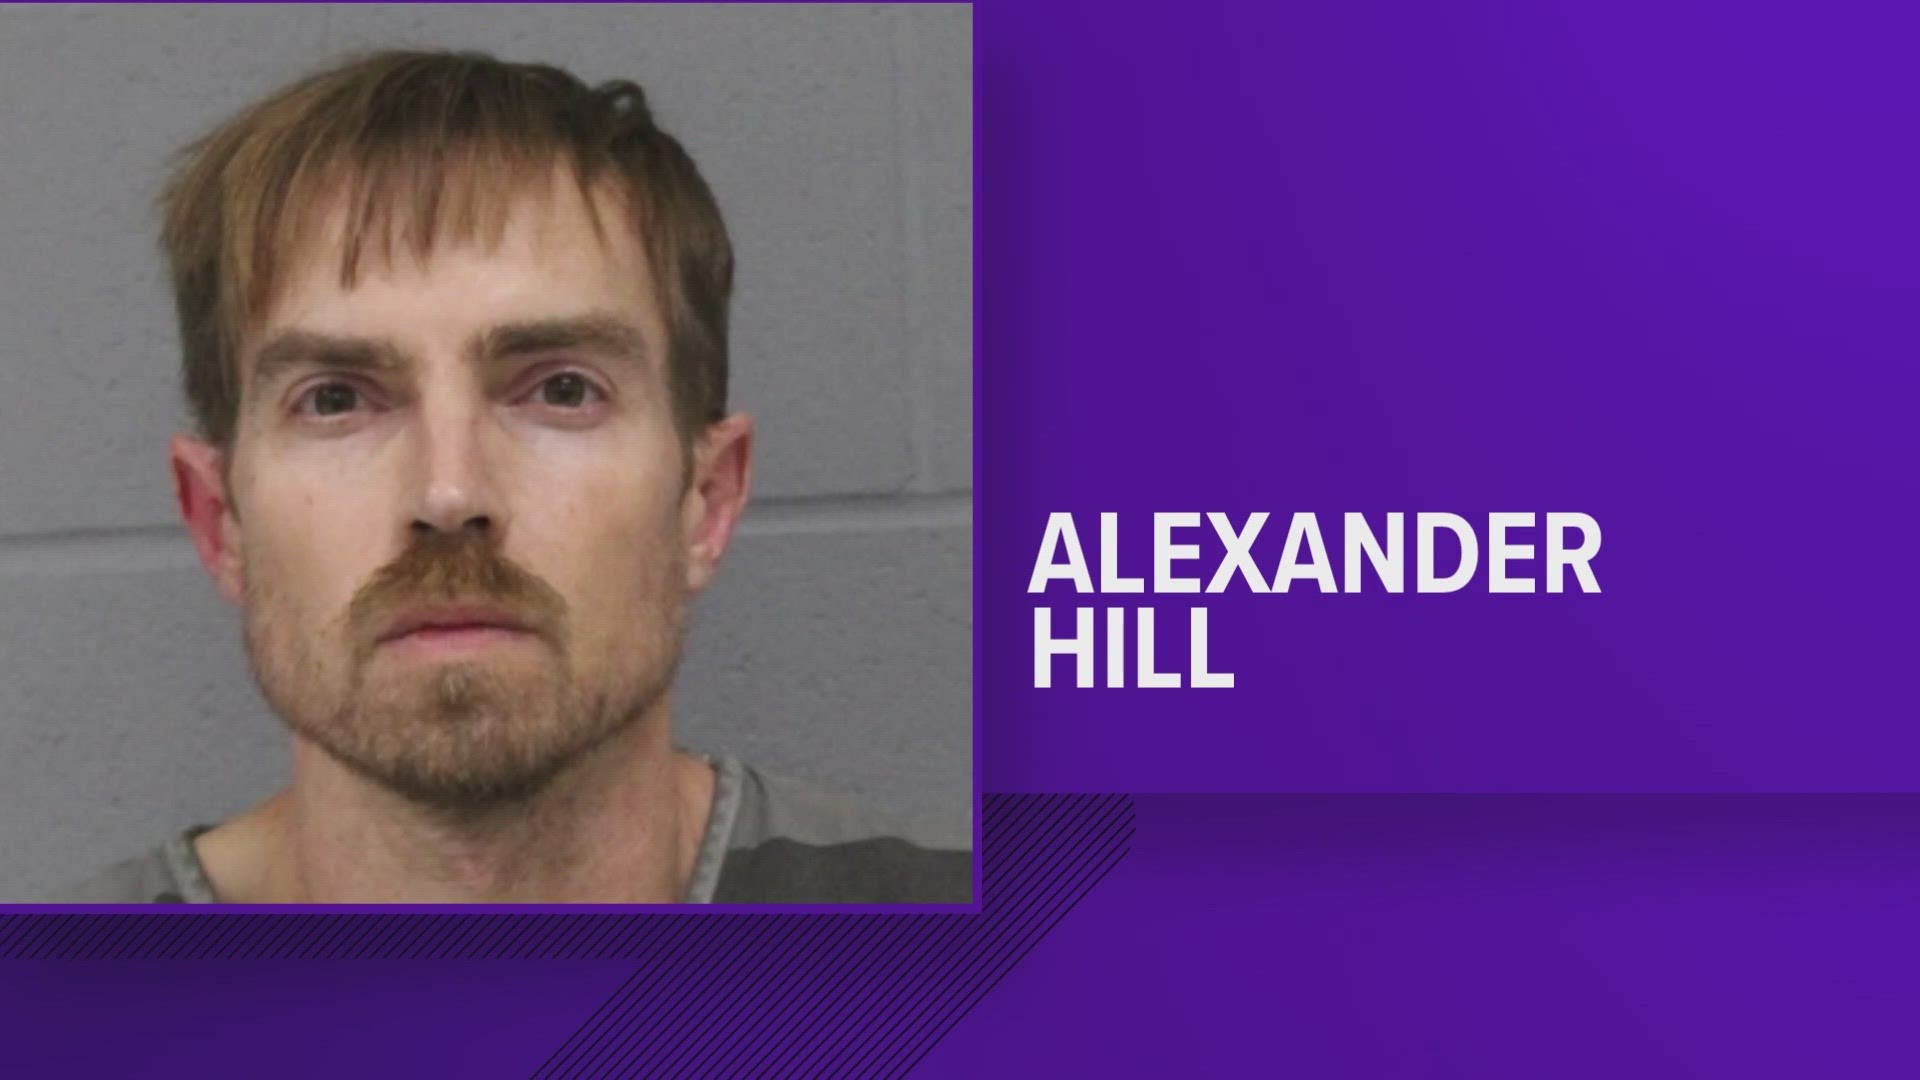 Alexander Jeffrey Hill is accused in connection with an incident at an IDEA Public School in Austin on Nov. 1.